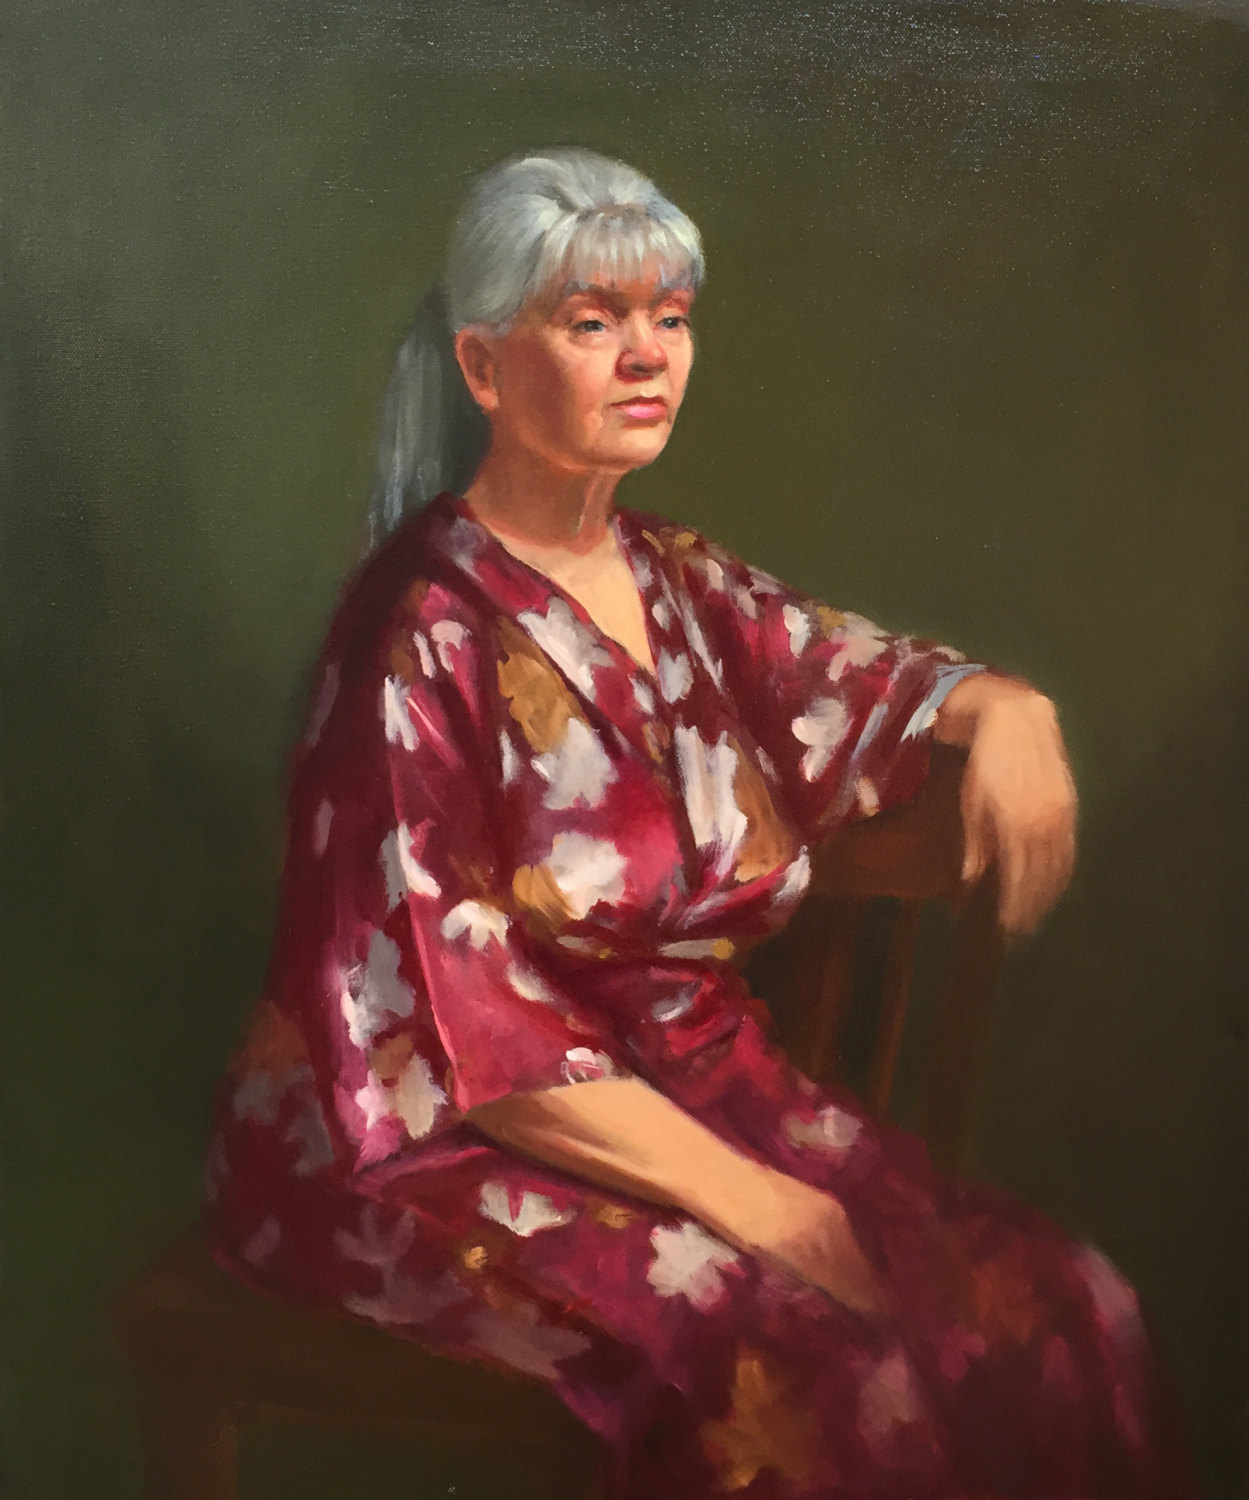 Woman in the robe 20x24 Oil on canvas 